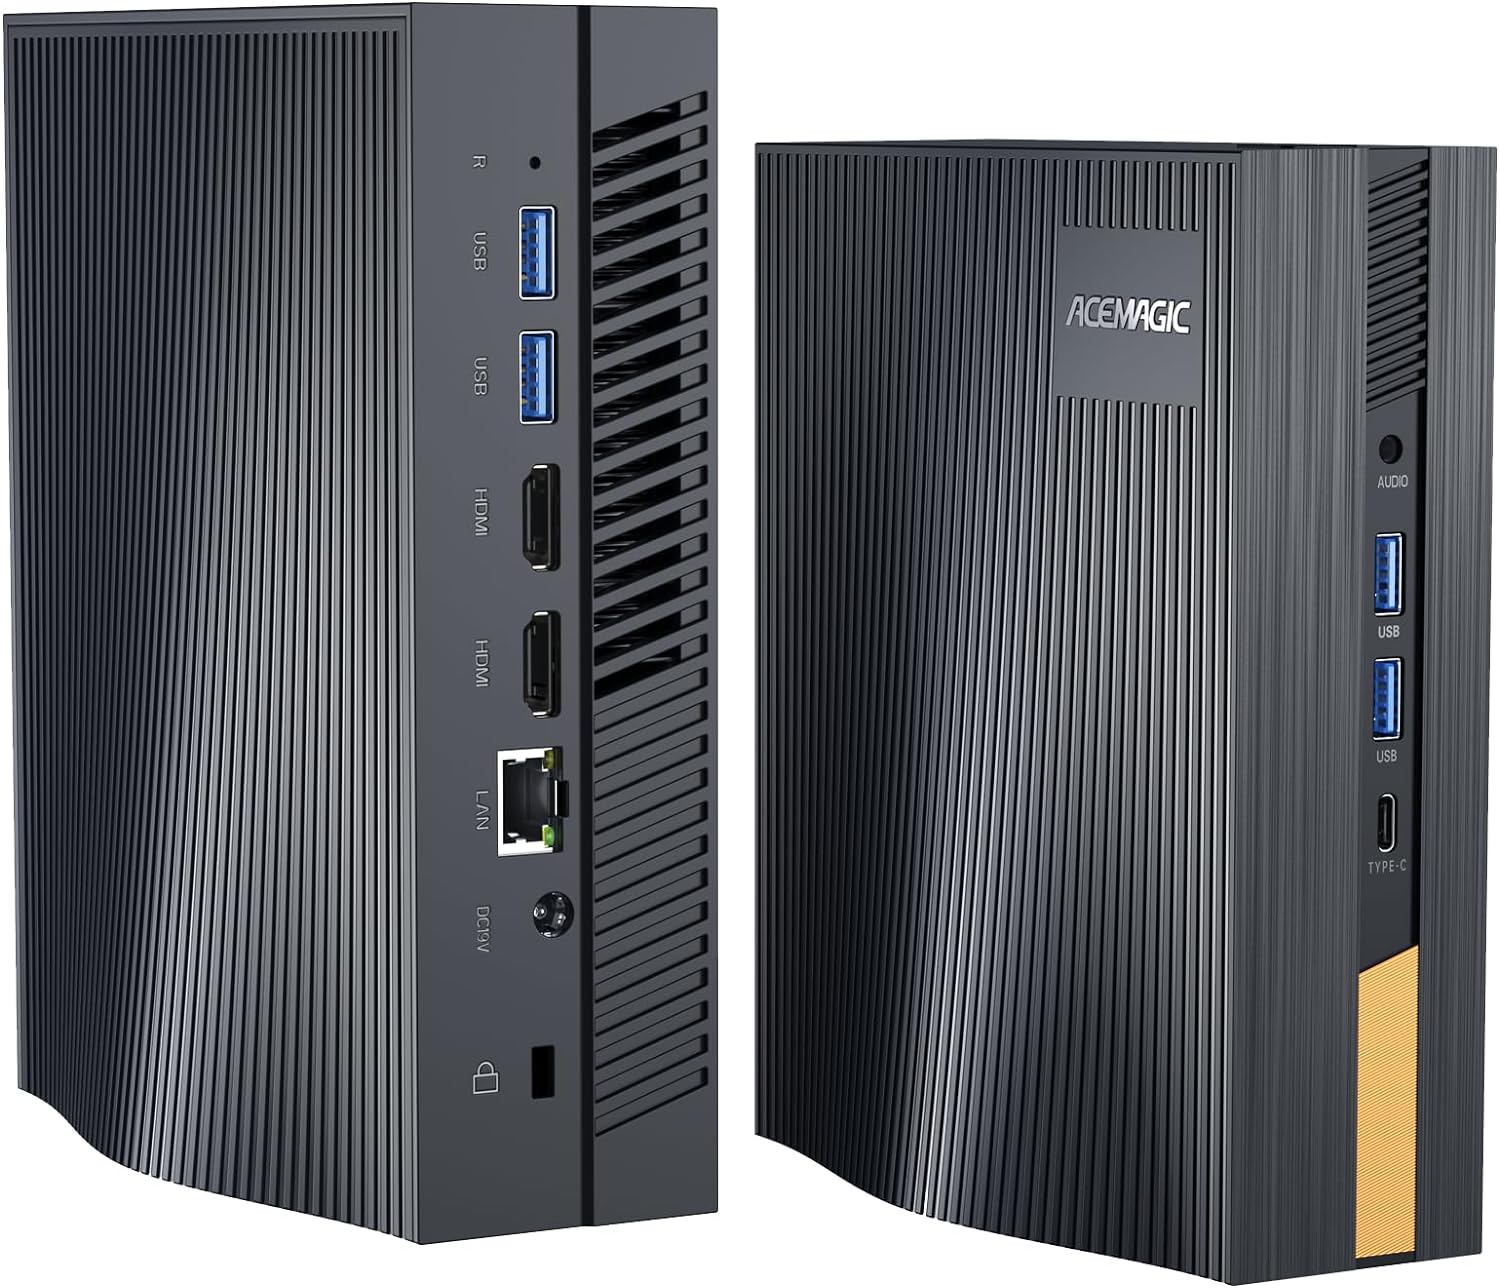 Acemagic AD15 Mini PC: Intel i5-12450H (Up to 4.4GHz), 32GB DDR4, 512GB NVMe PCIe 3.0 SSD w/ Wall Mounted Bracket & Hanging Screws $319 + Free Shipping